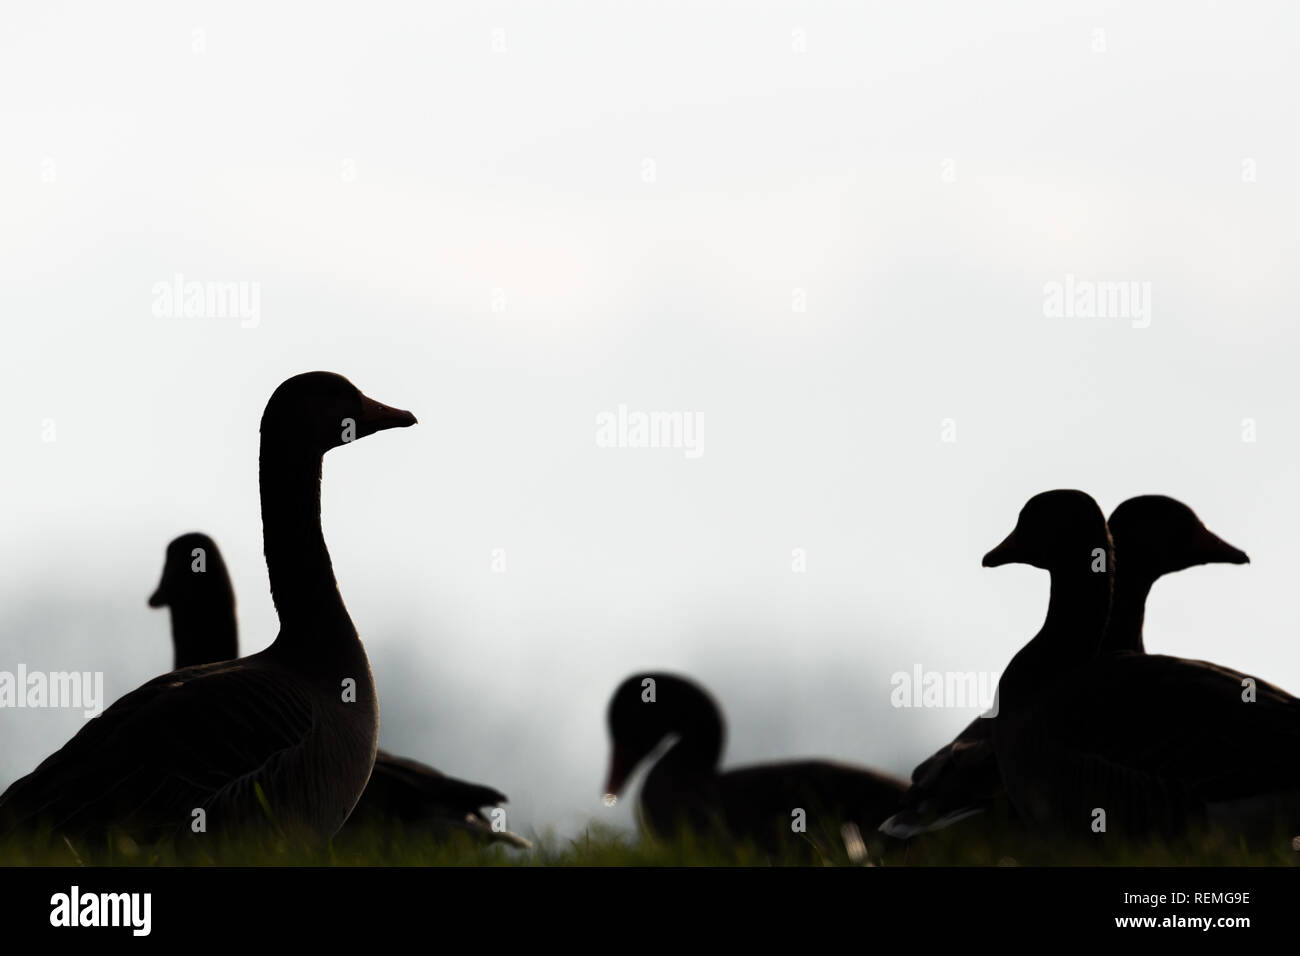 dark silhouettes of natural gray geese in backlight, white background Stock Photo